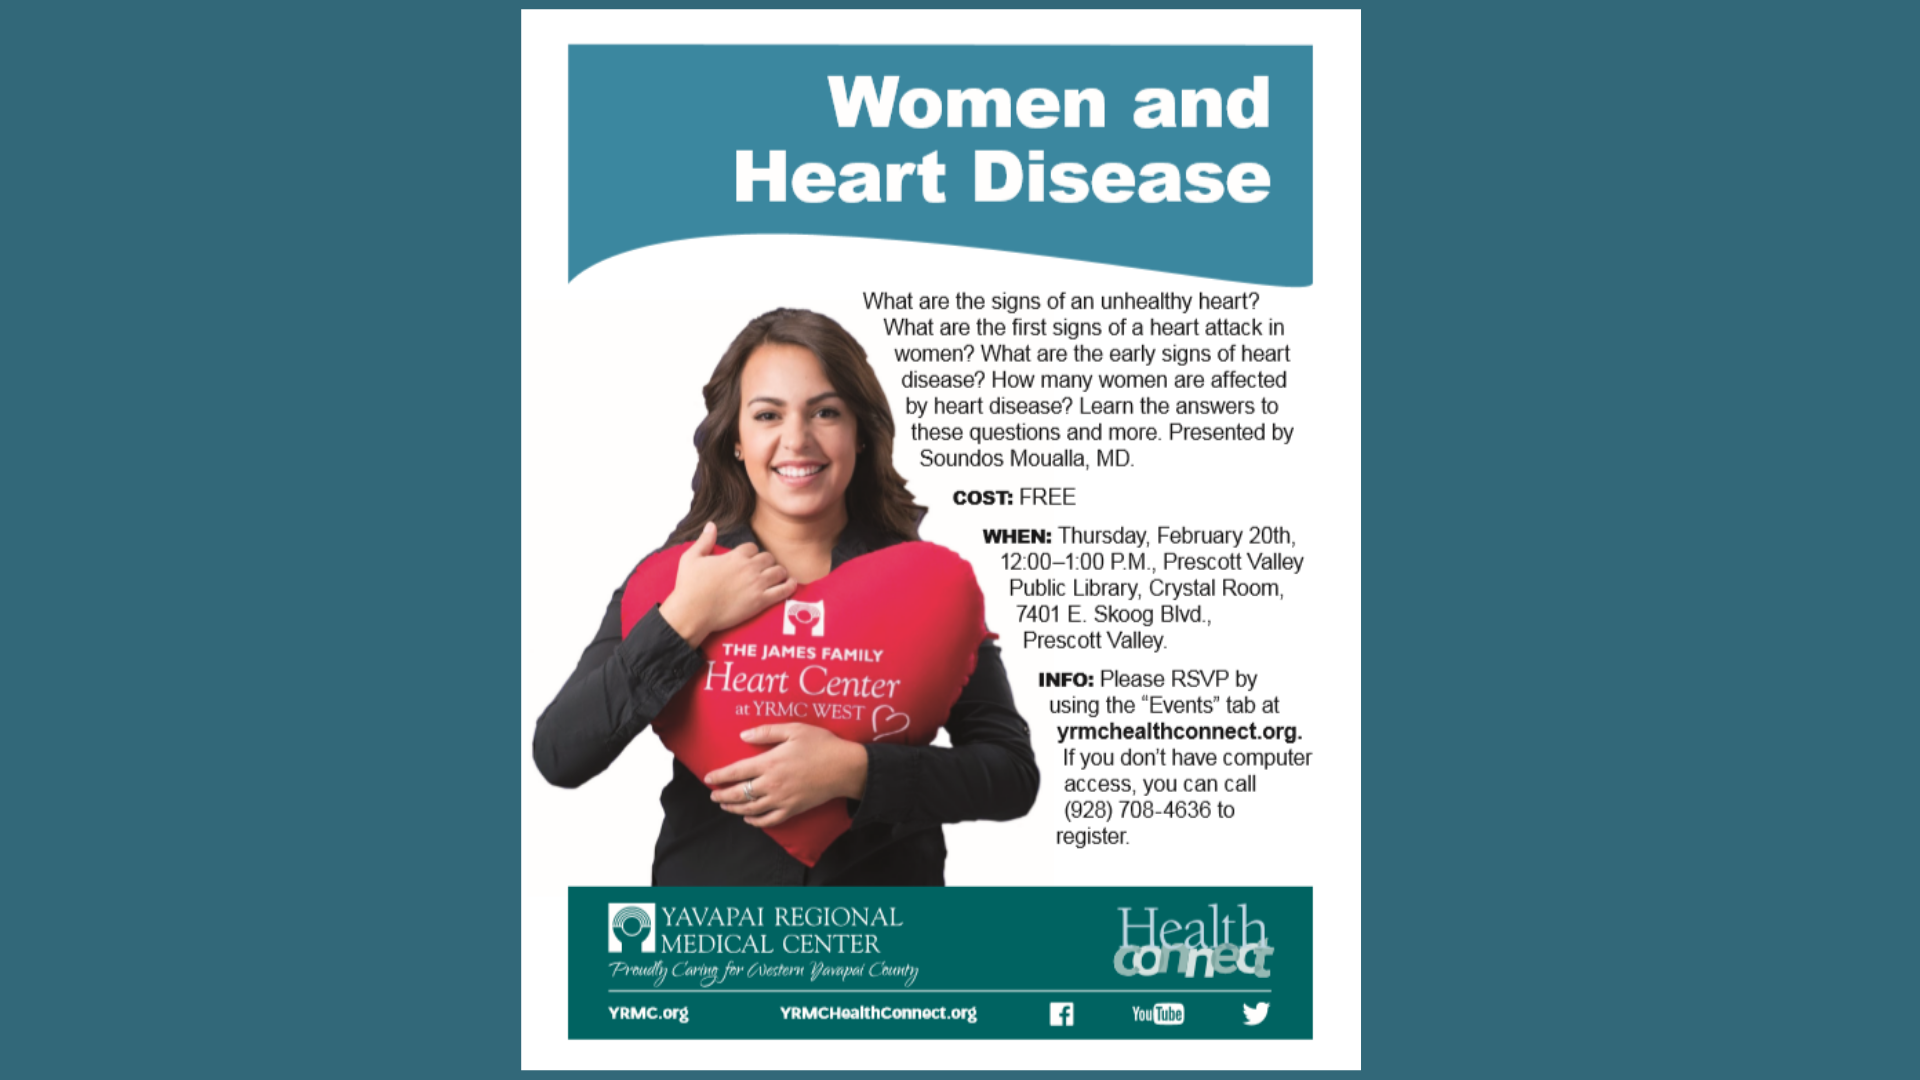 YRMC Program ‘Women and Heart Disease’ - Registration Required 